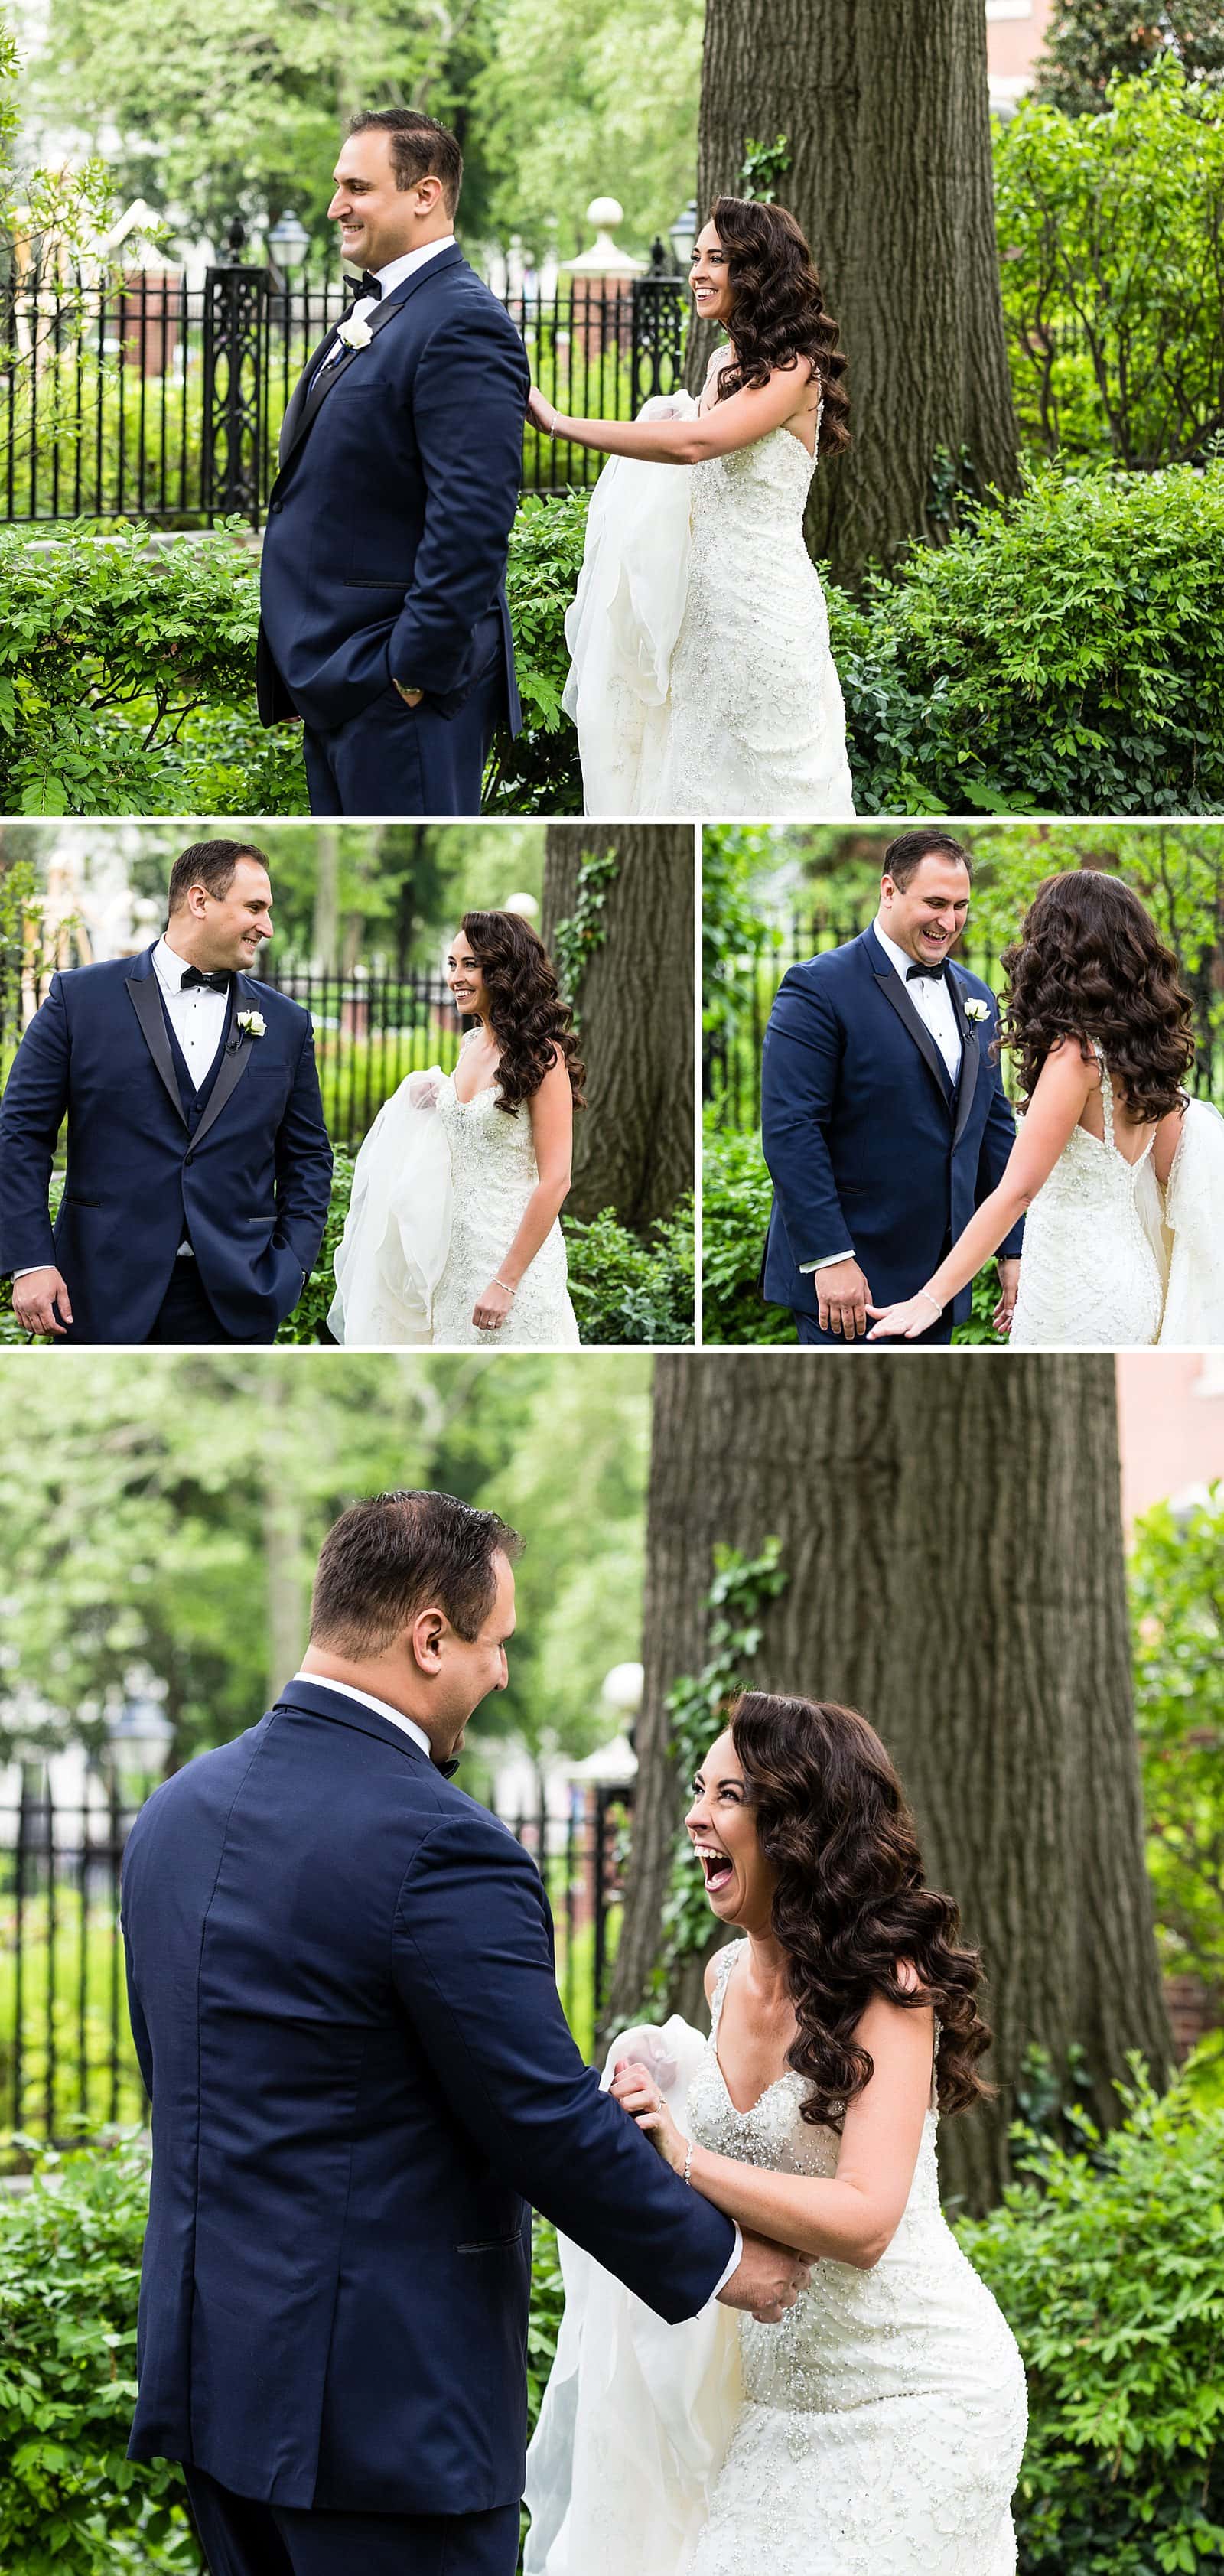 Couples first look, Wedding first look, Bride and Groom First Look, Philadelphia Downtown Club Wedding